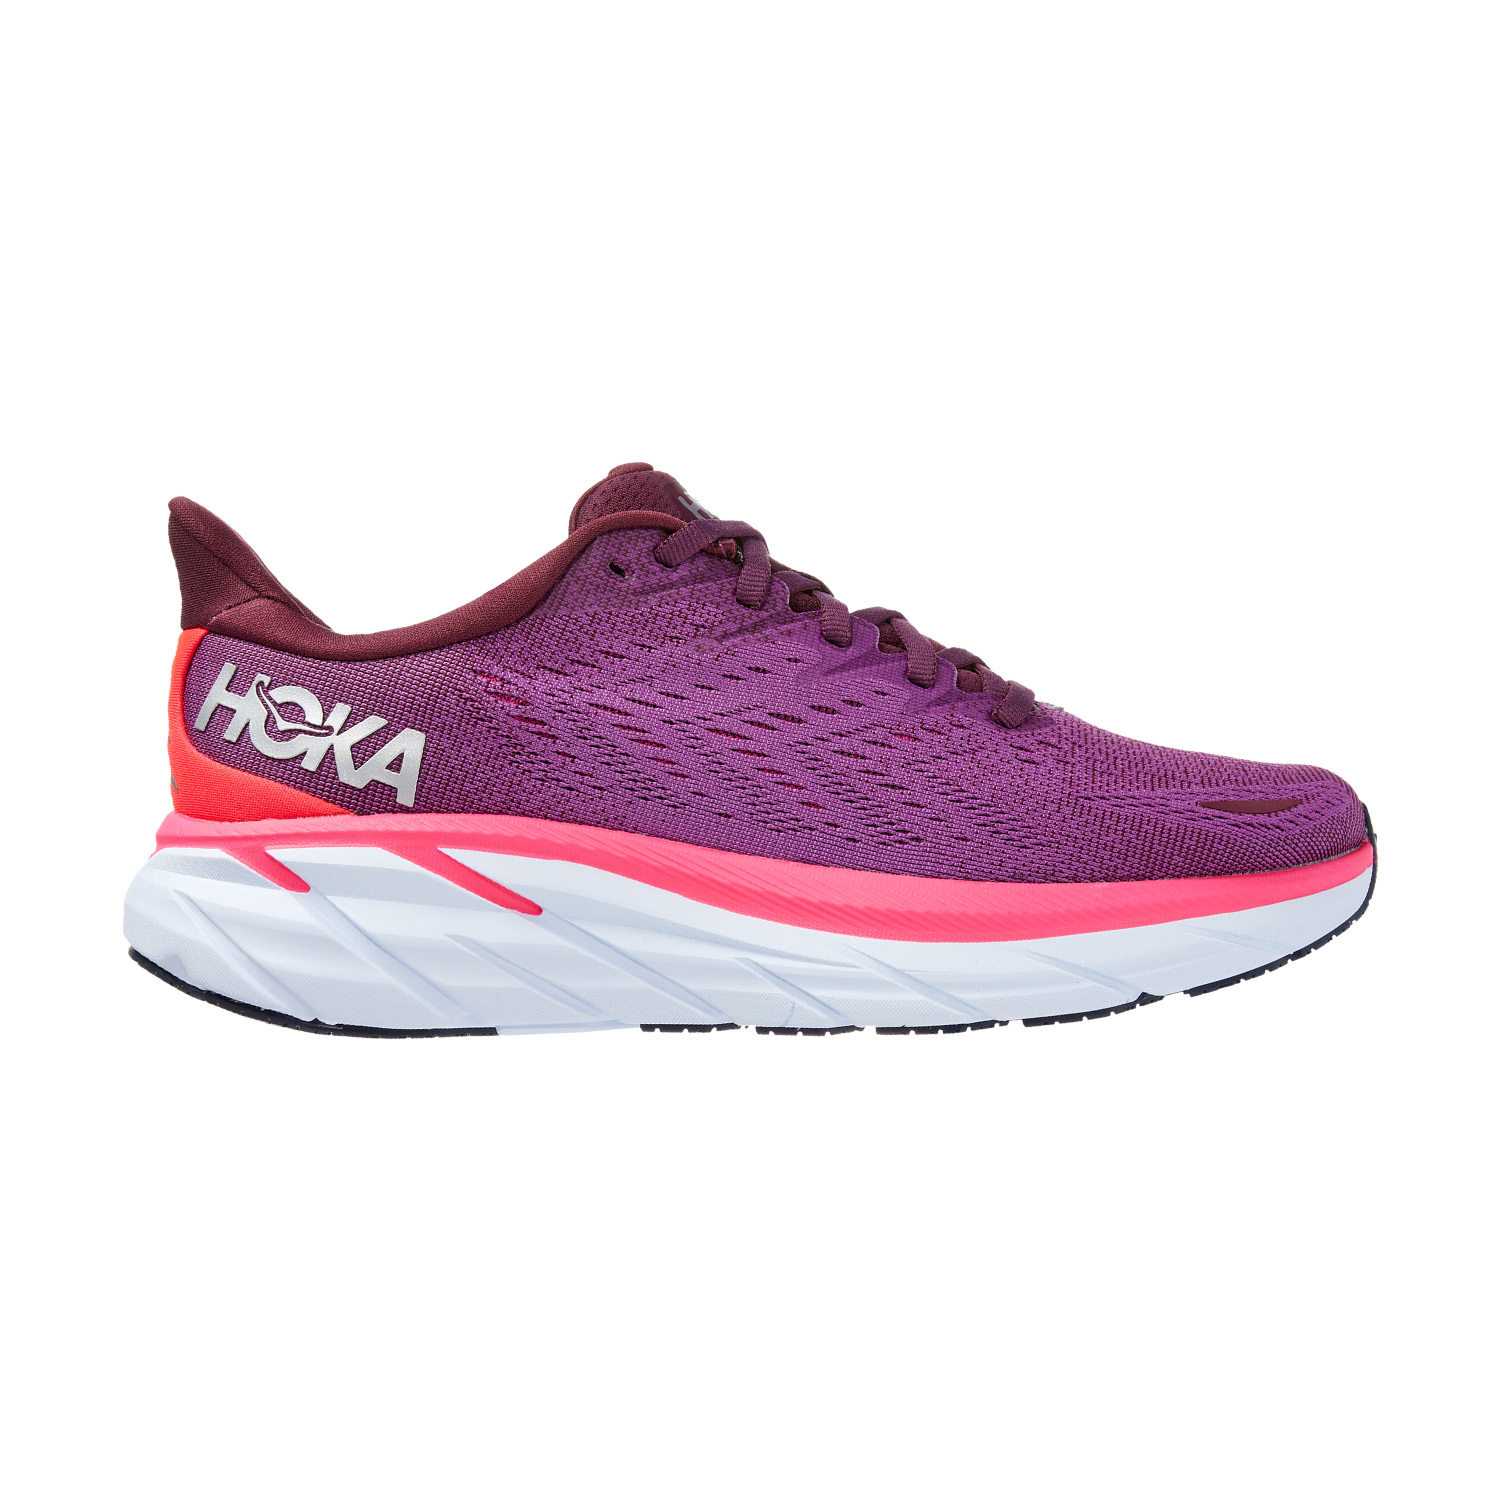 Hoka One One Clifton 8 Women's Running Shoes - Baby Lavender